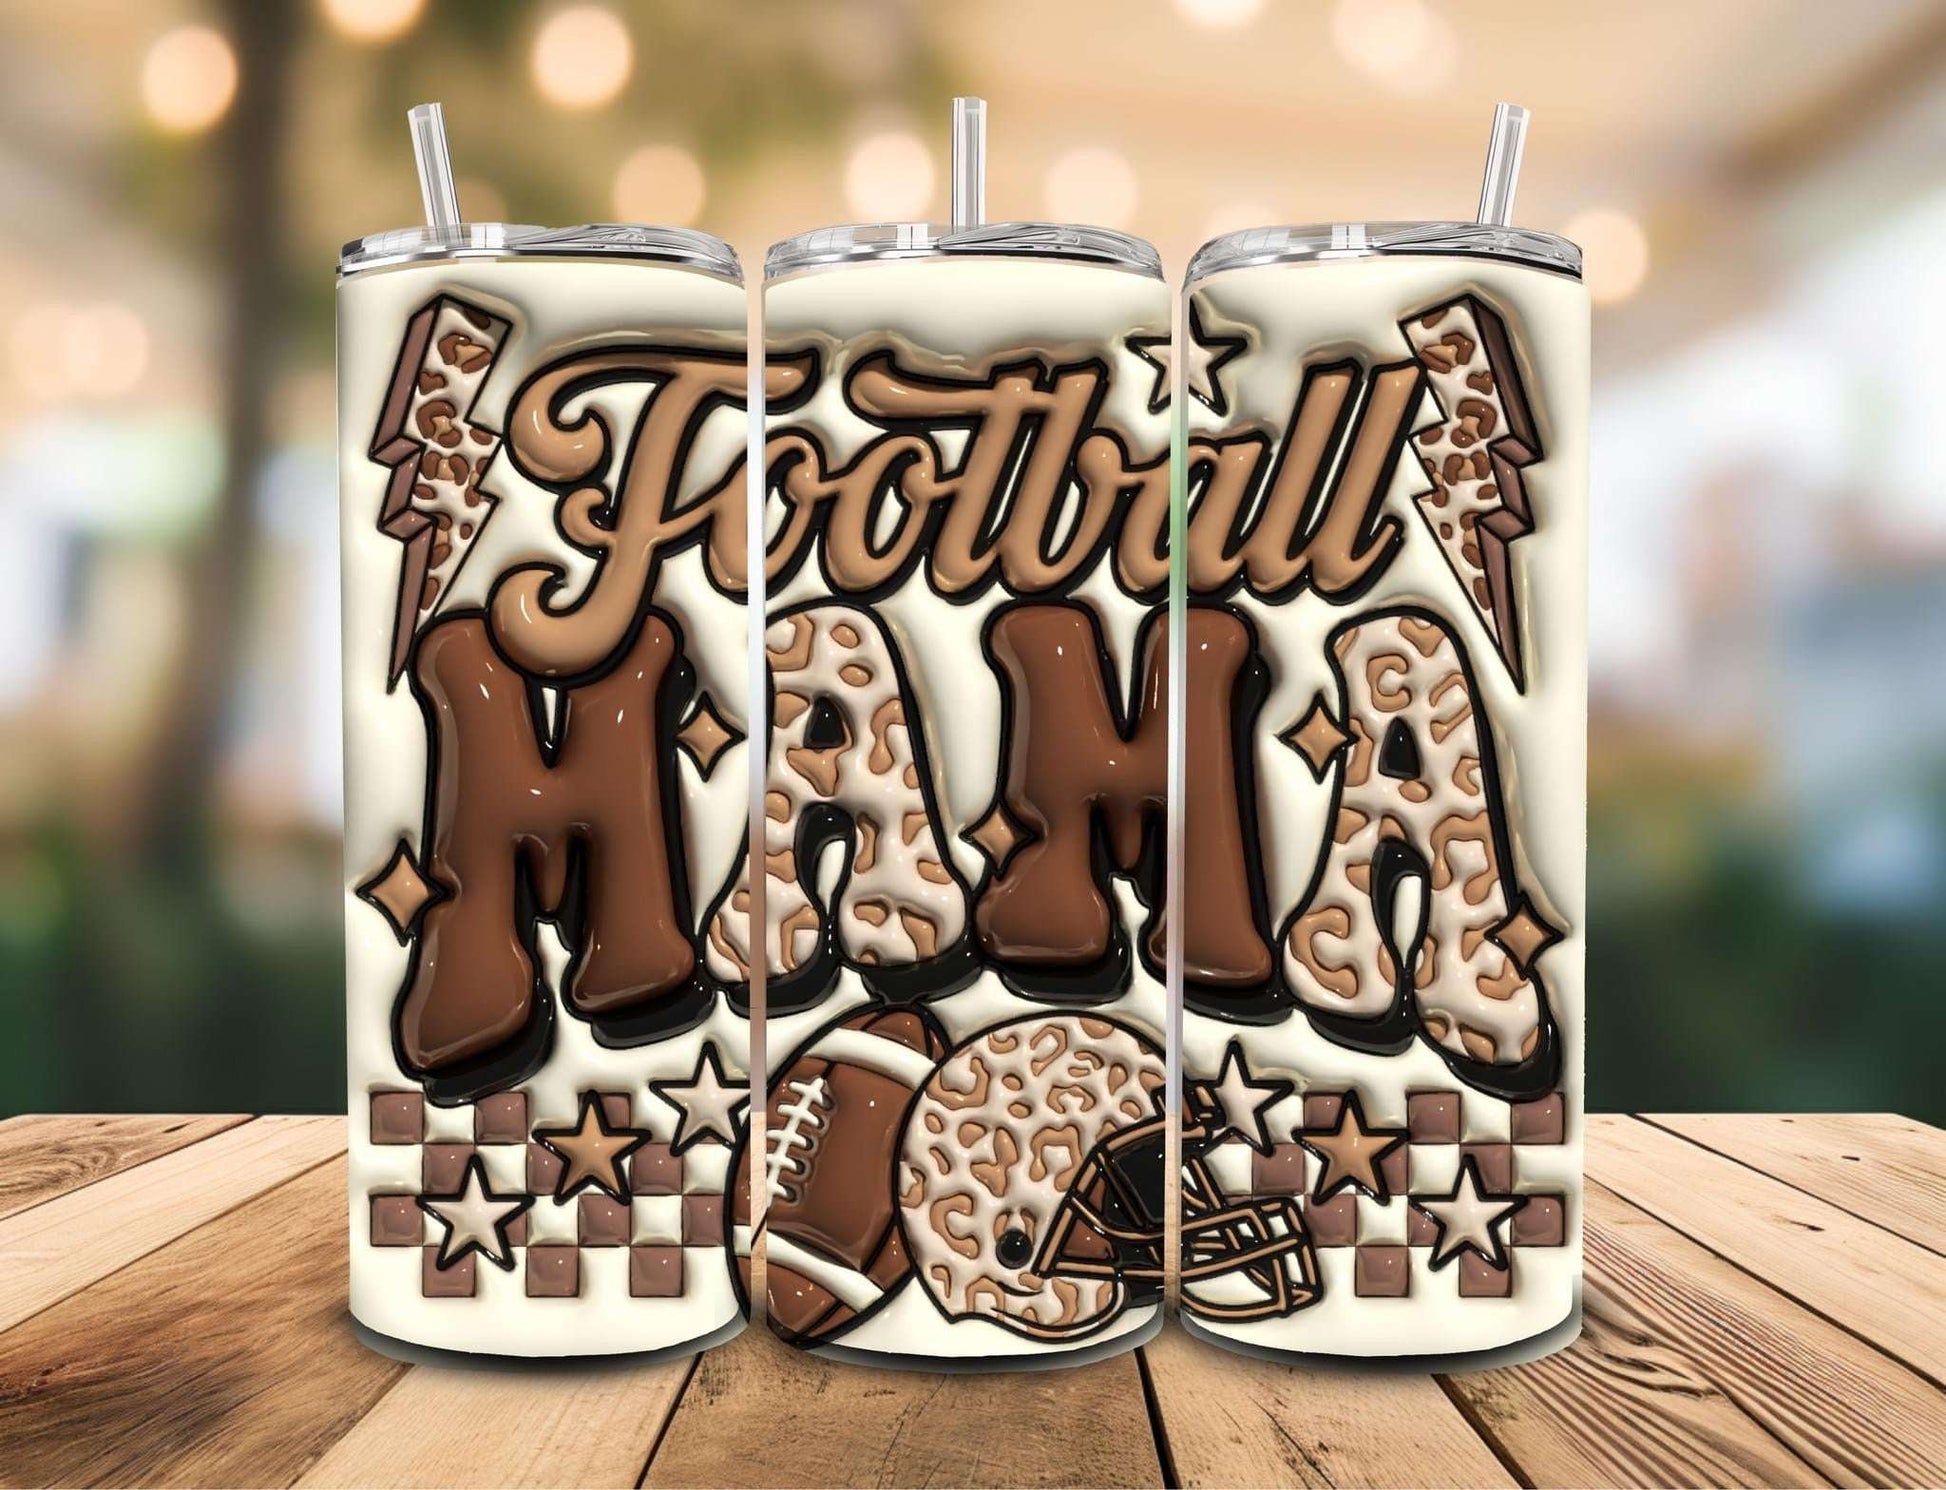 3D Puff Mama Football 20 oz Stainless Steel Tumbler - Perfect for Game Day Best Sellers Tumblers 20 Daisy Designs & Creations LLC